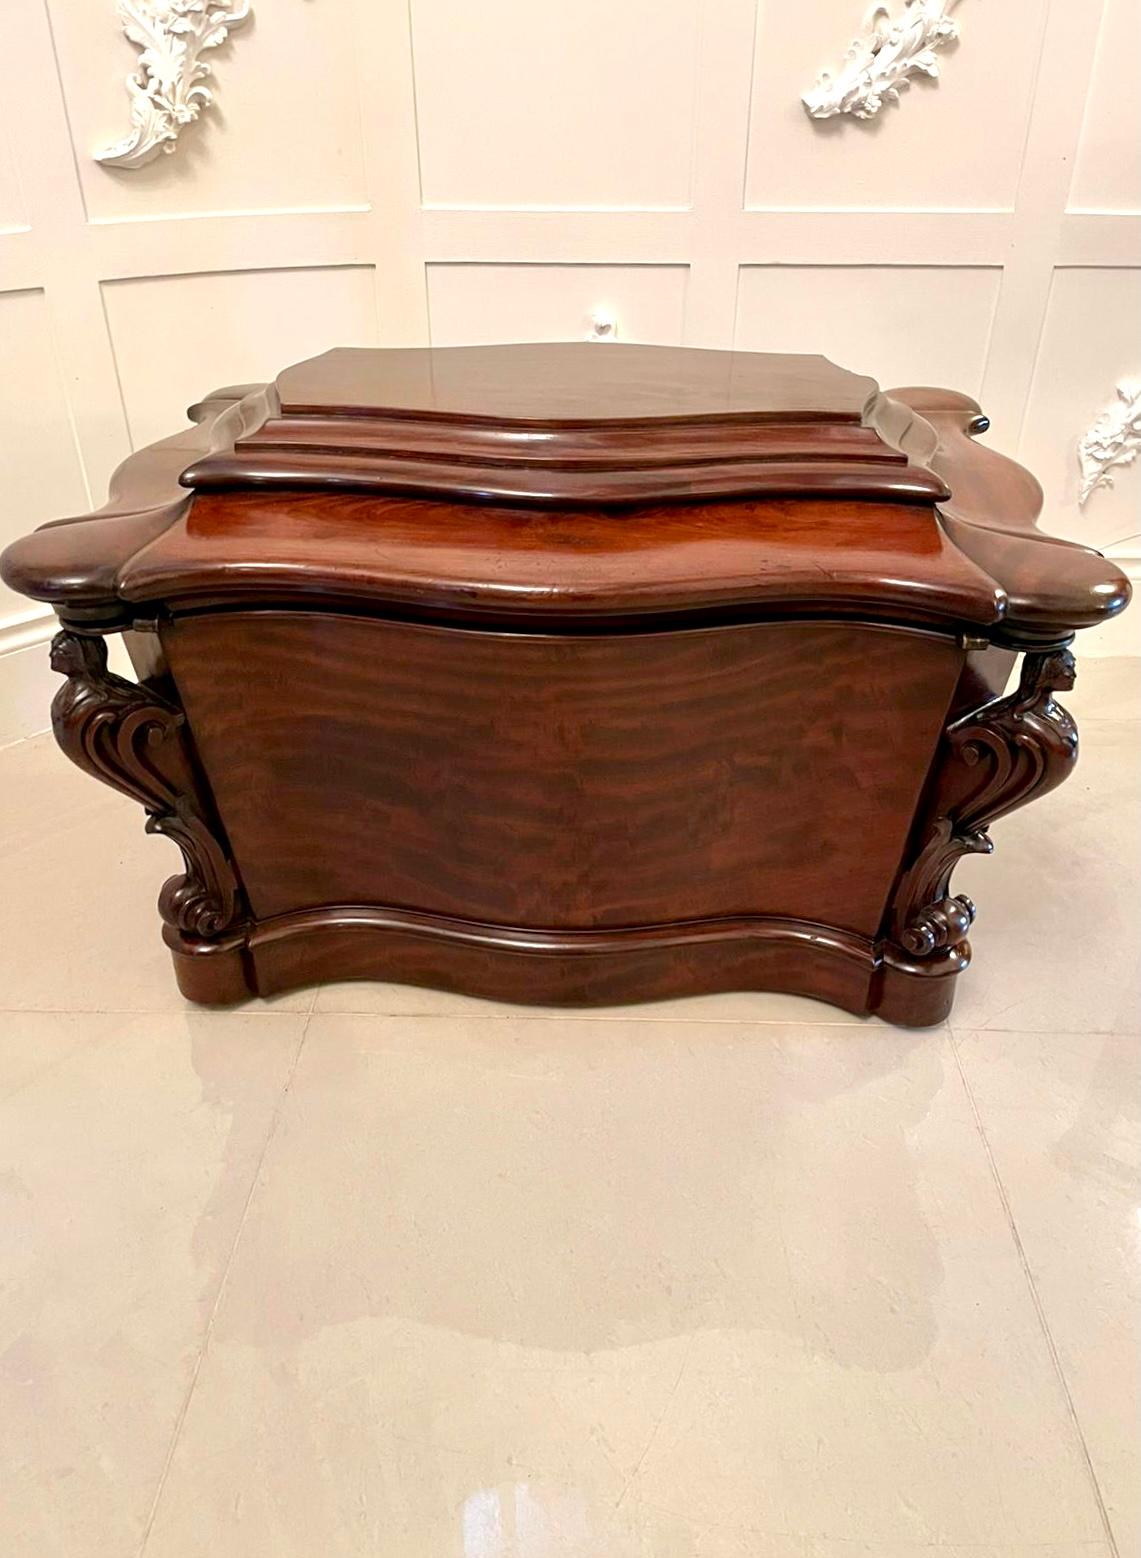 Hand-Carved Outstanding Quality Antique William IV Mahogany Serpentine Shaped Wine Cooler For Sale